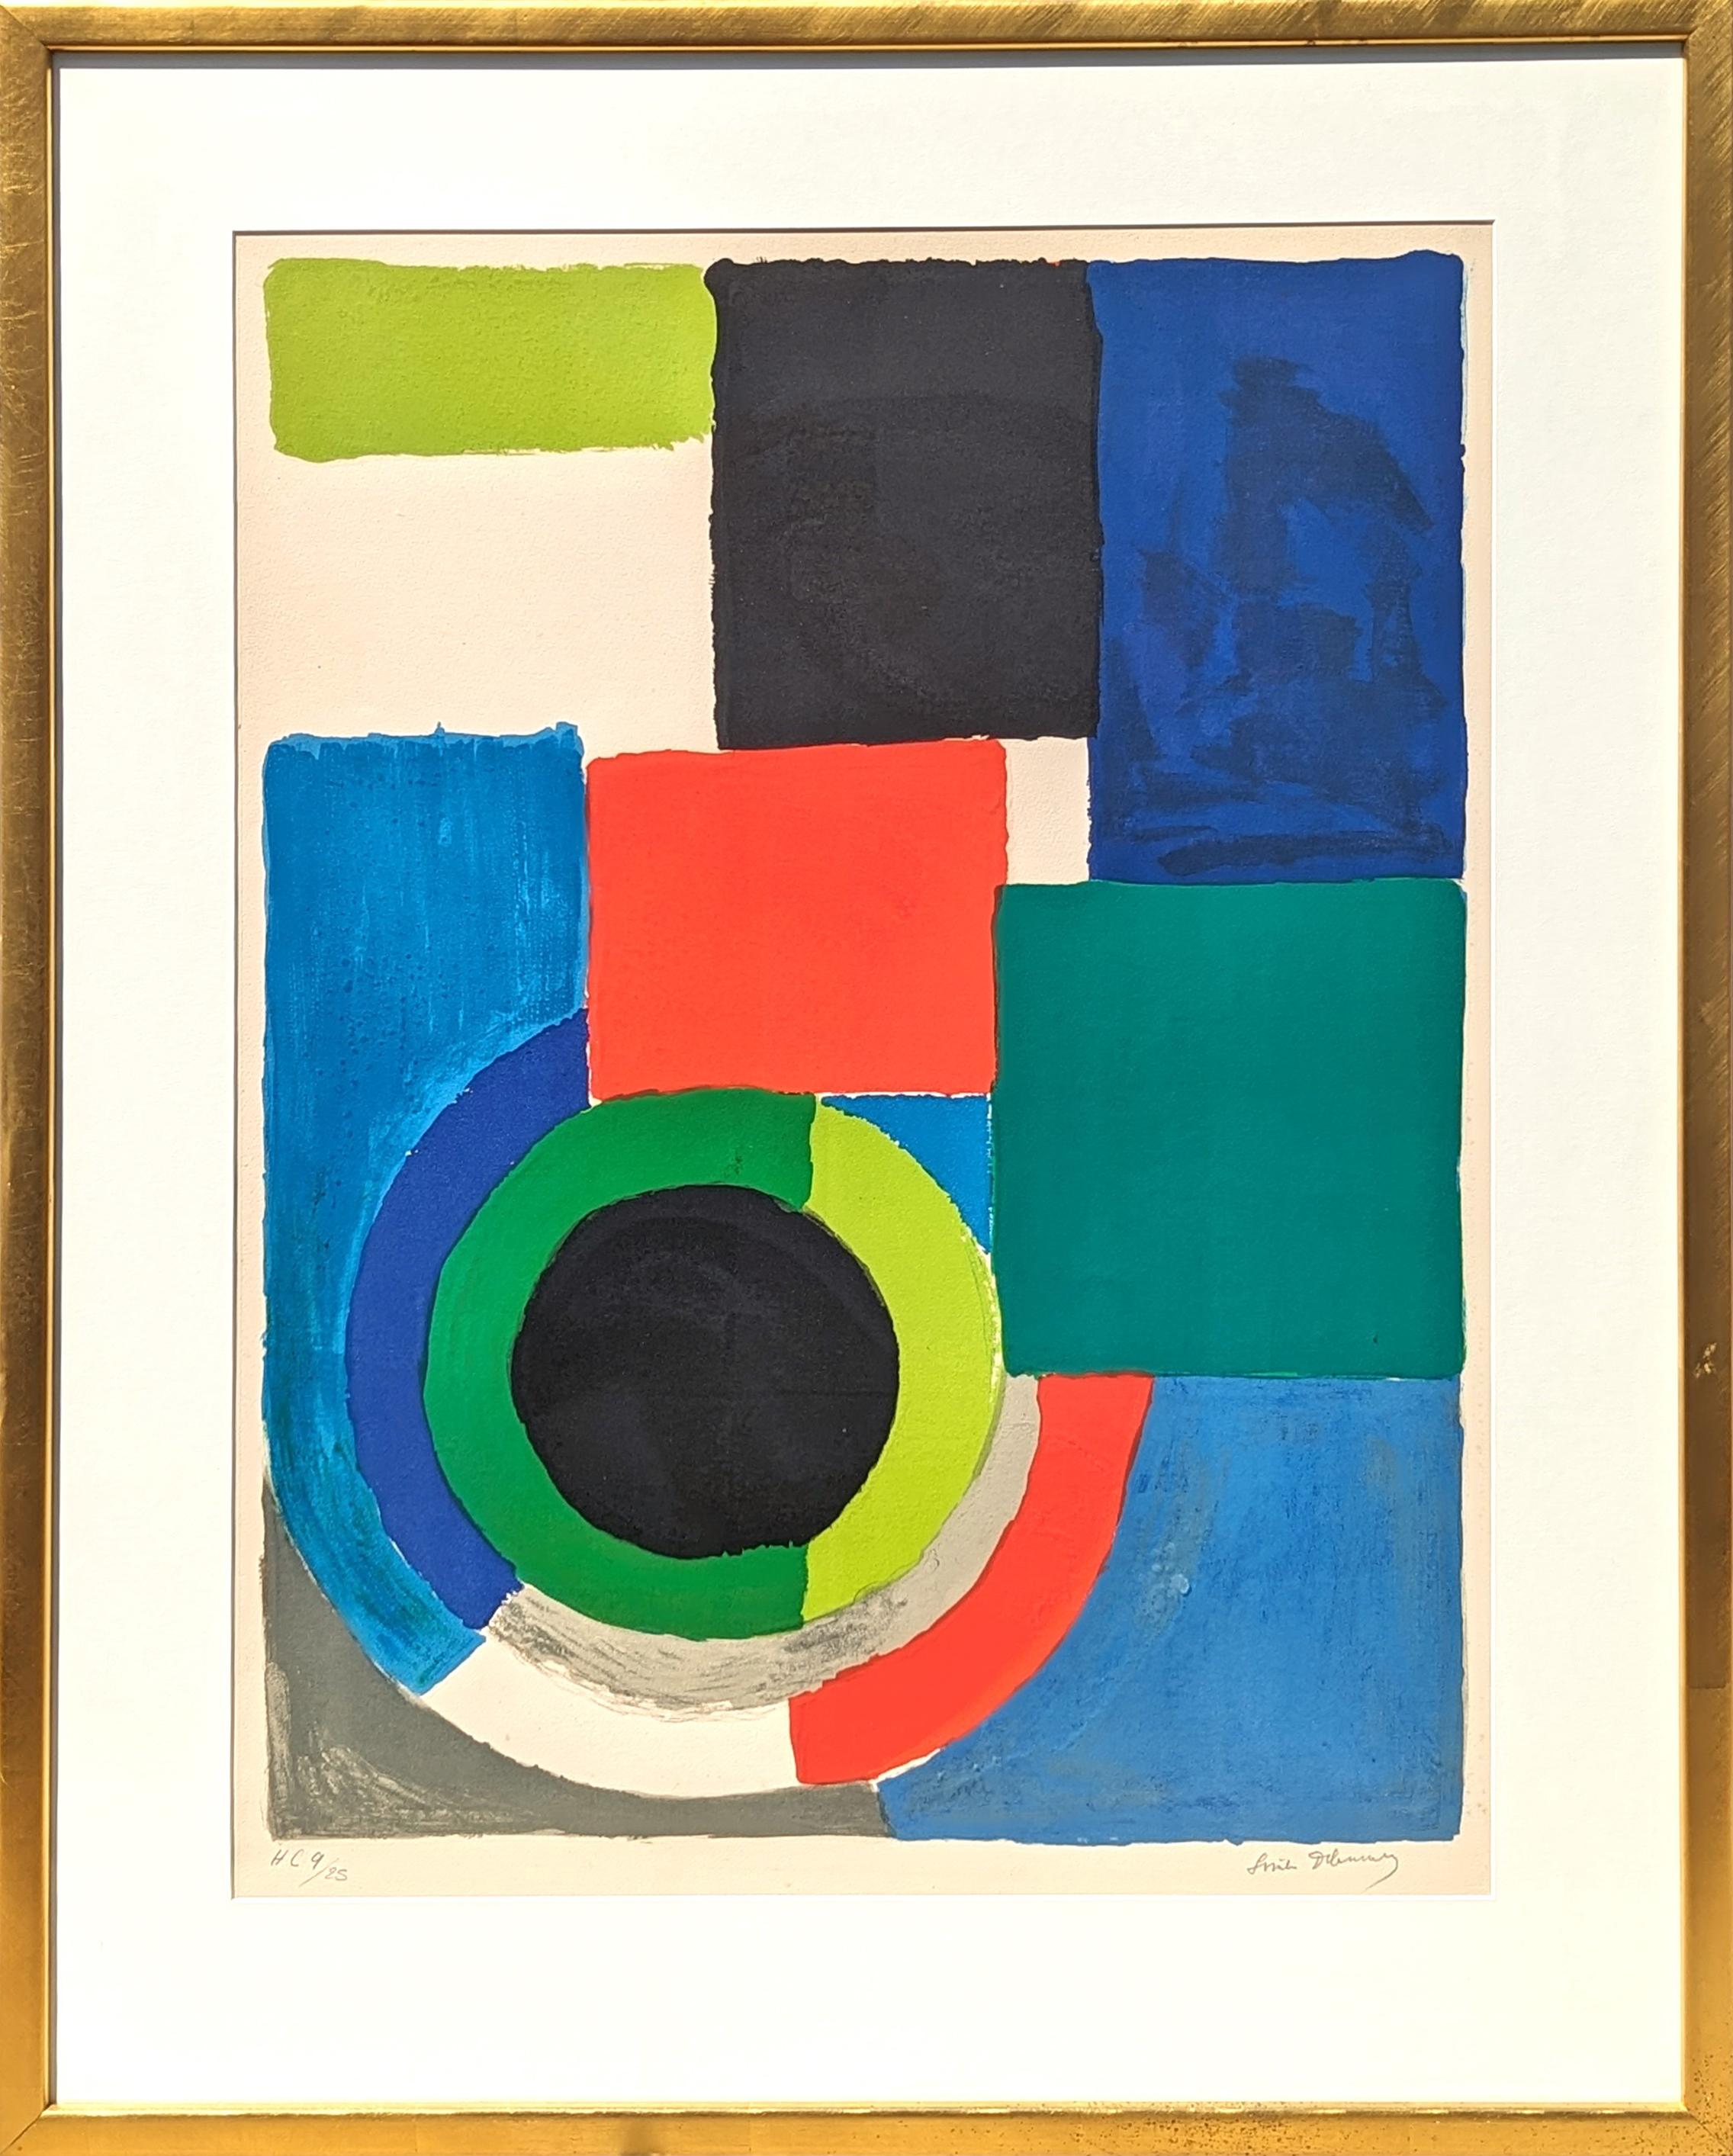 Sonia Delaunay Abstract Print - "Grand Carré Rouge" Modern Geometric Abstract Orphism Lithograph Edition 9/25